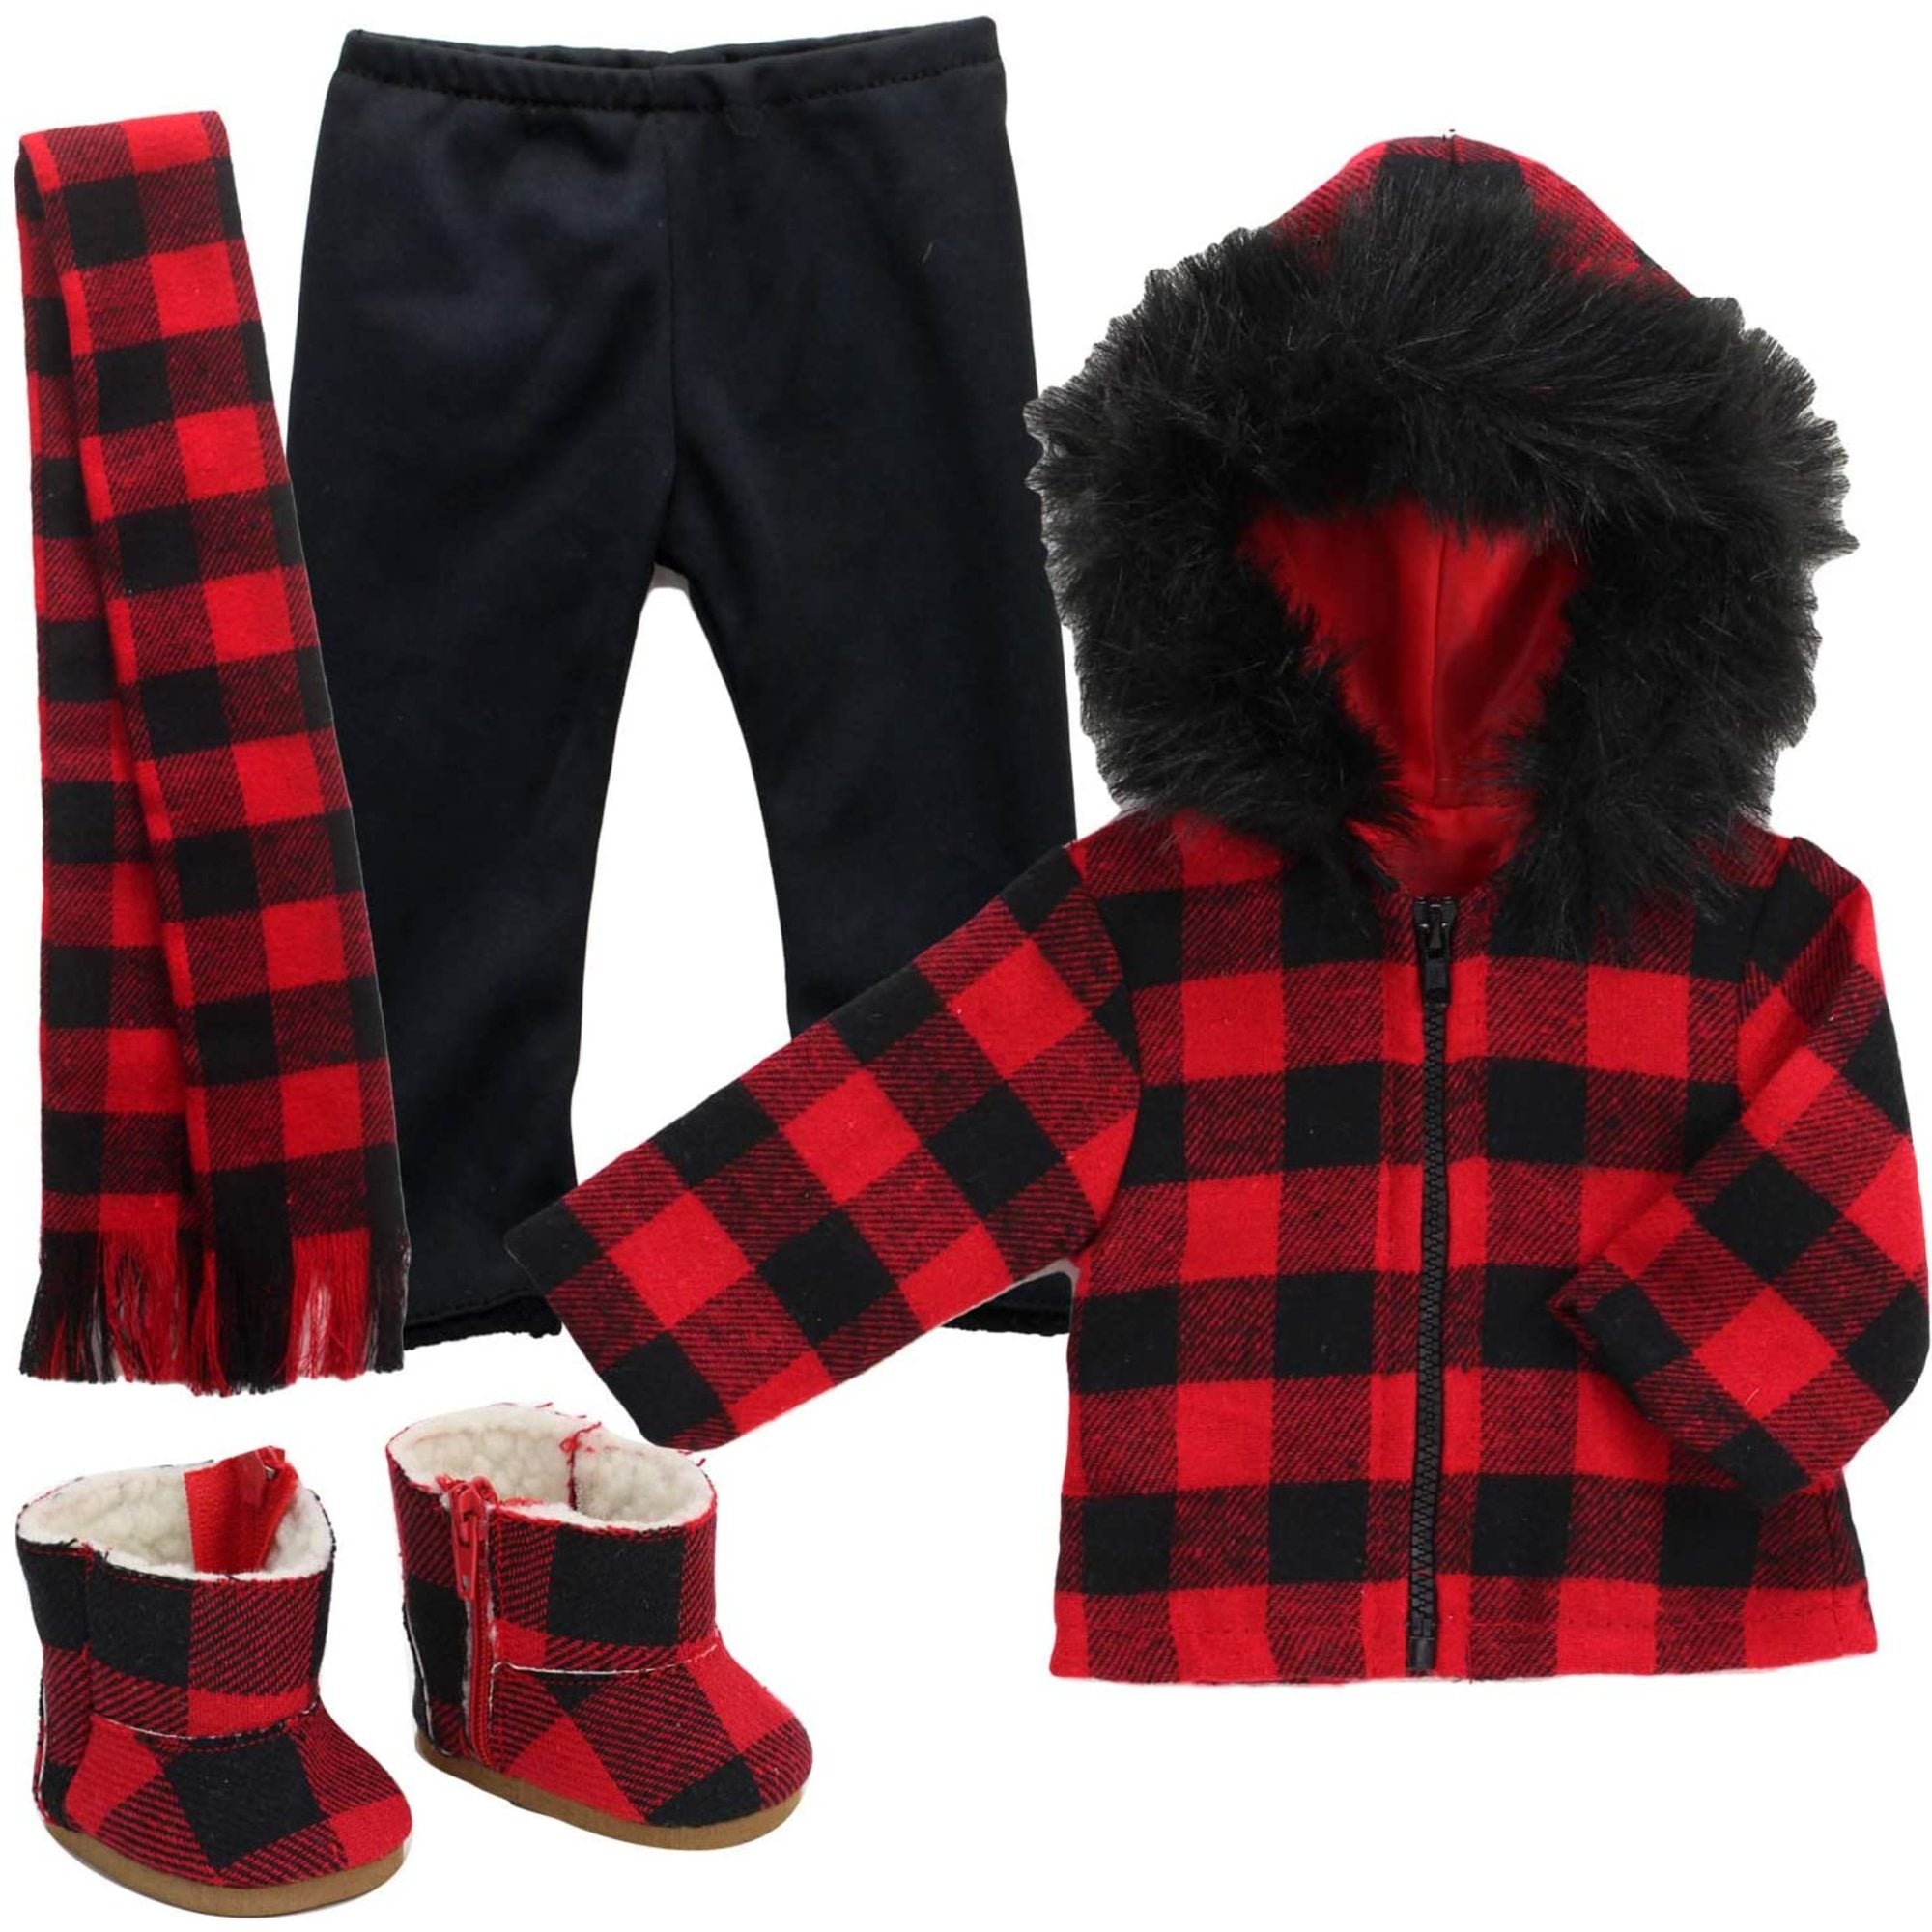 Sophia's Buffalo Check Winter Outfit for 18" Dolls, Red/Black